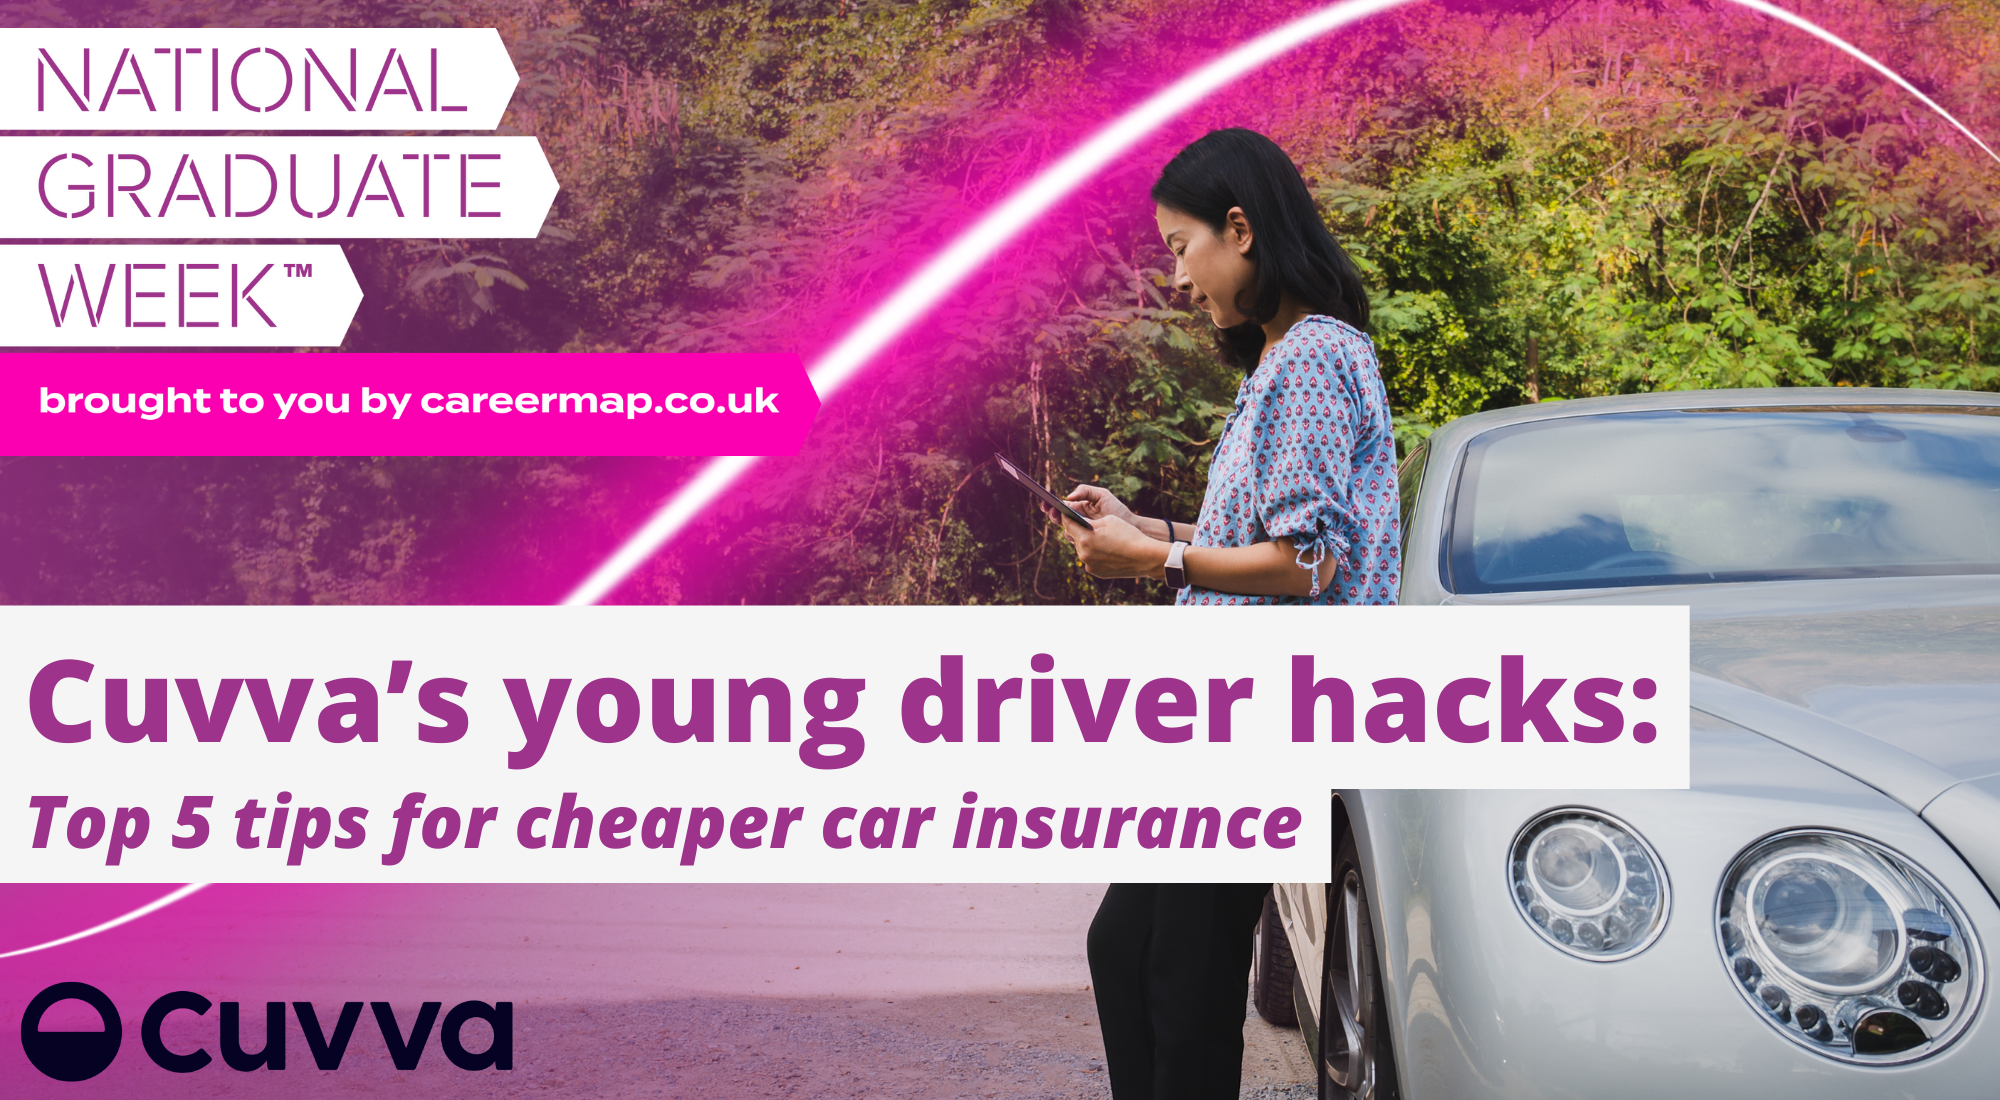 Cuvva’s young driver hacks – top 5 tips for cheaper car insurance